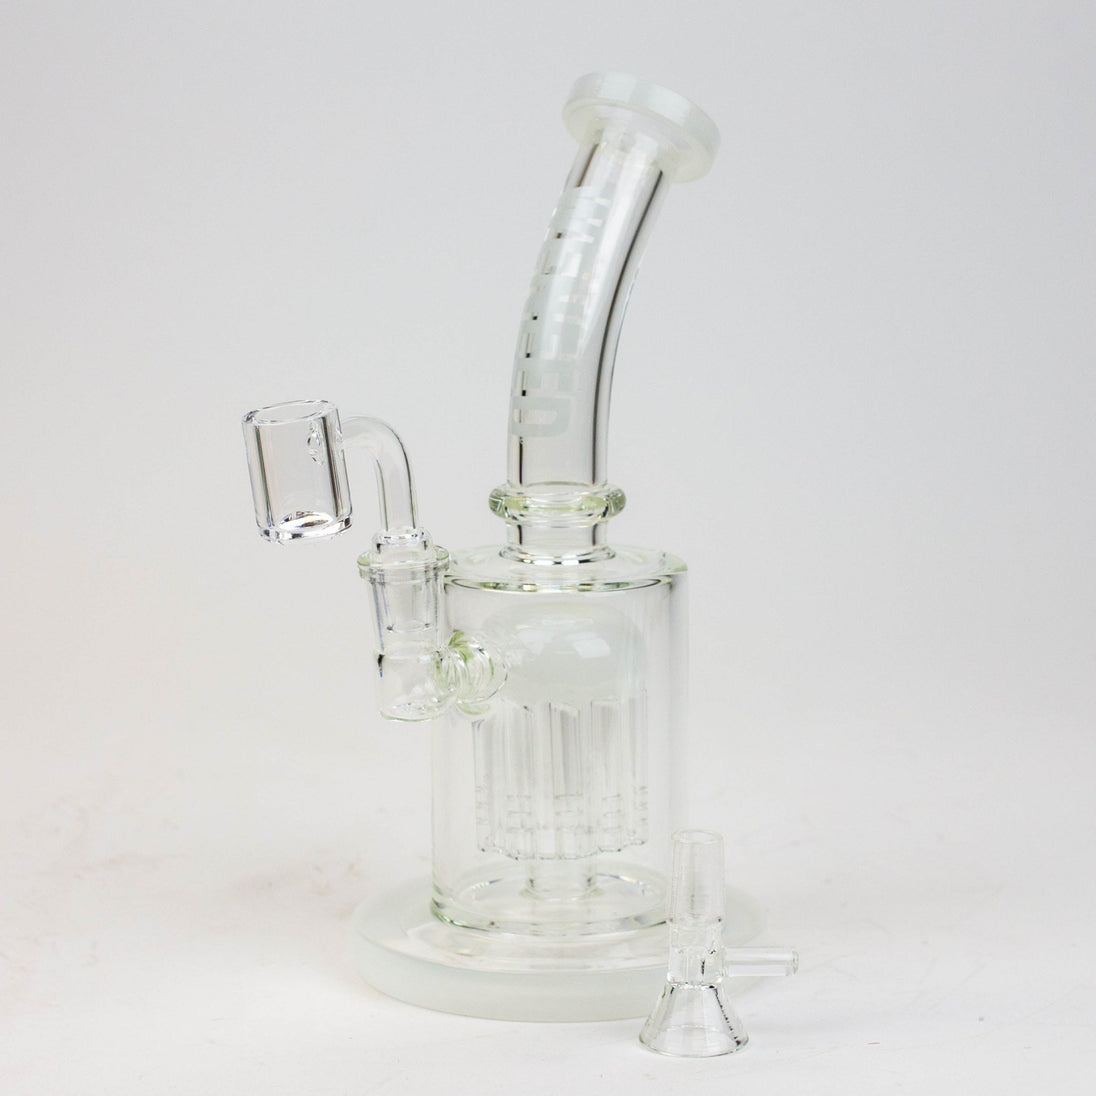 WENEED®-10" 2-in-1 Tree Perc Water Bong/Rig - Glasss Station